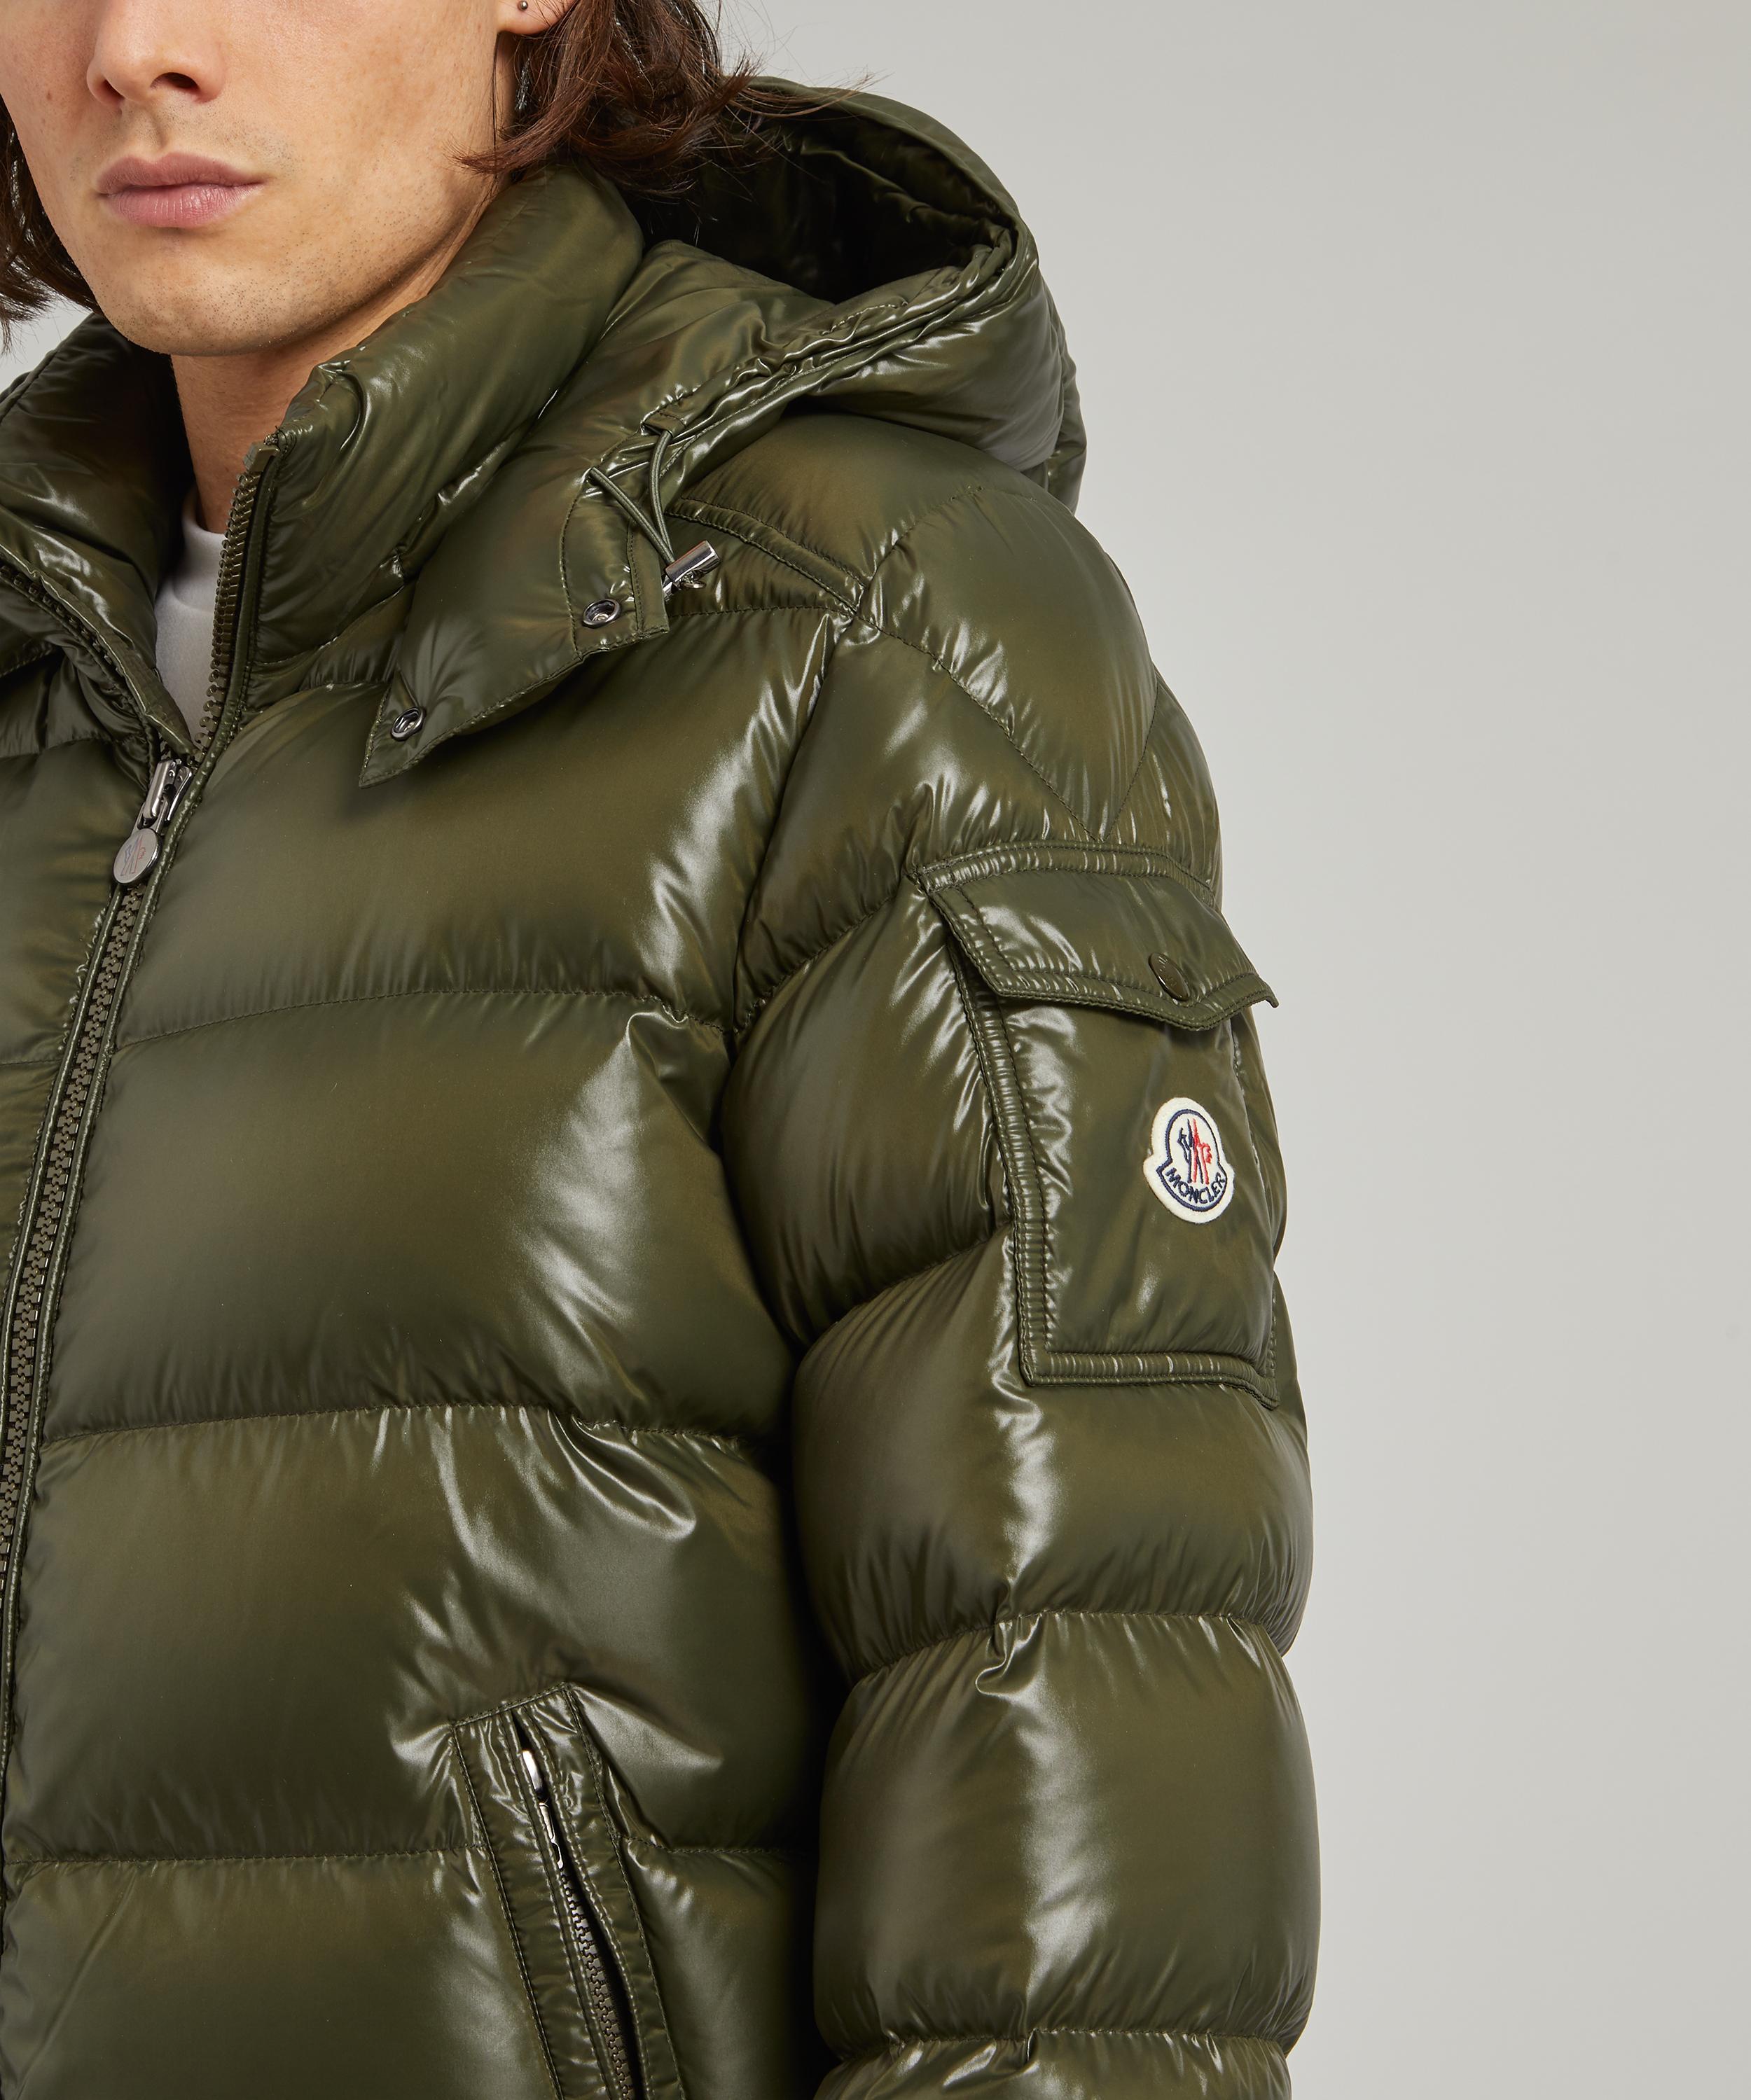 Moncler Synthetic Maya Down Jacket in Olive (Green) for Men - Save 39% |  Lyst